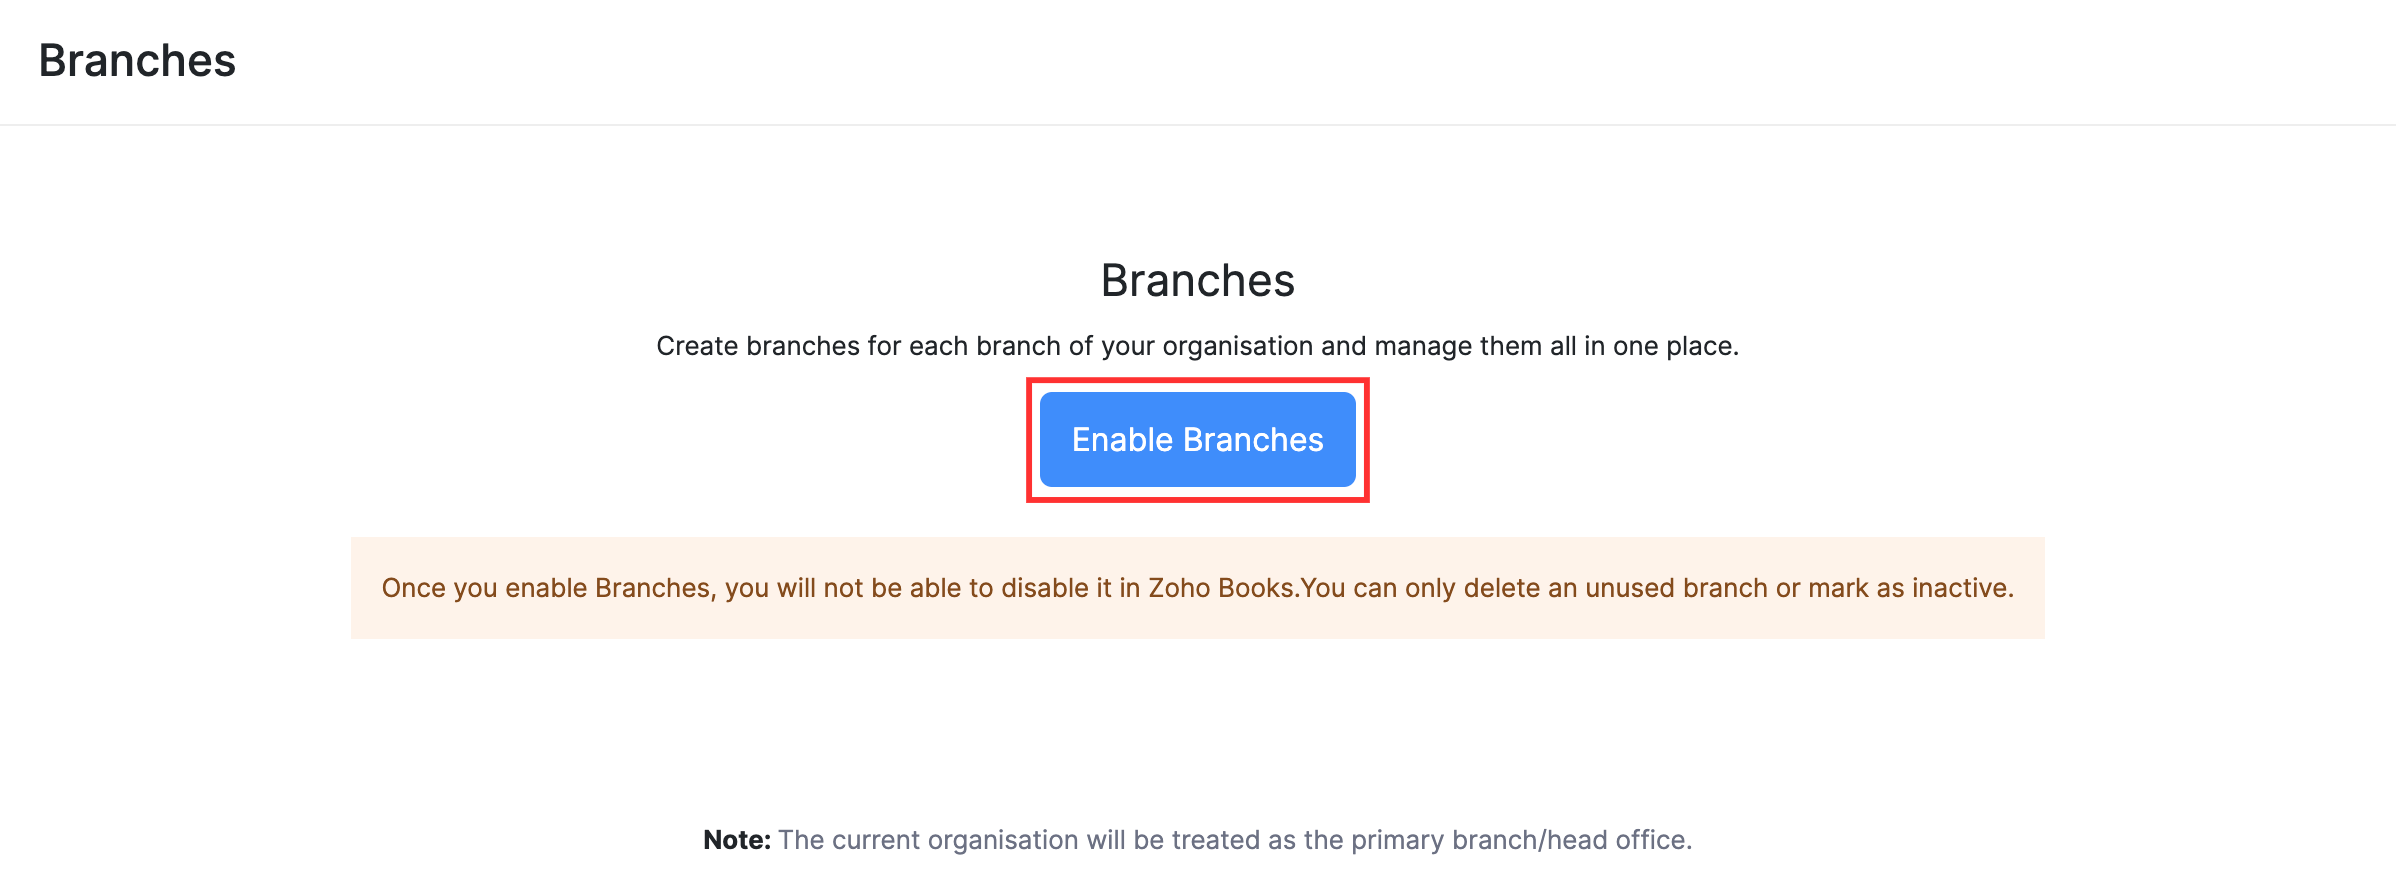 Enable Branches